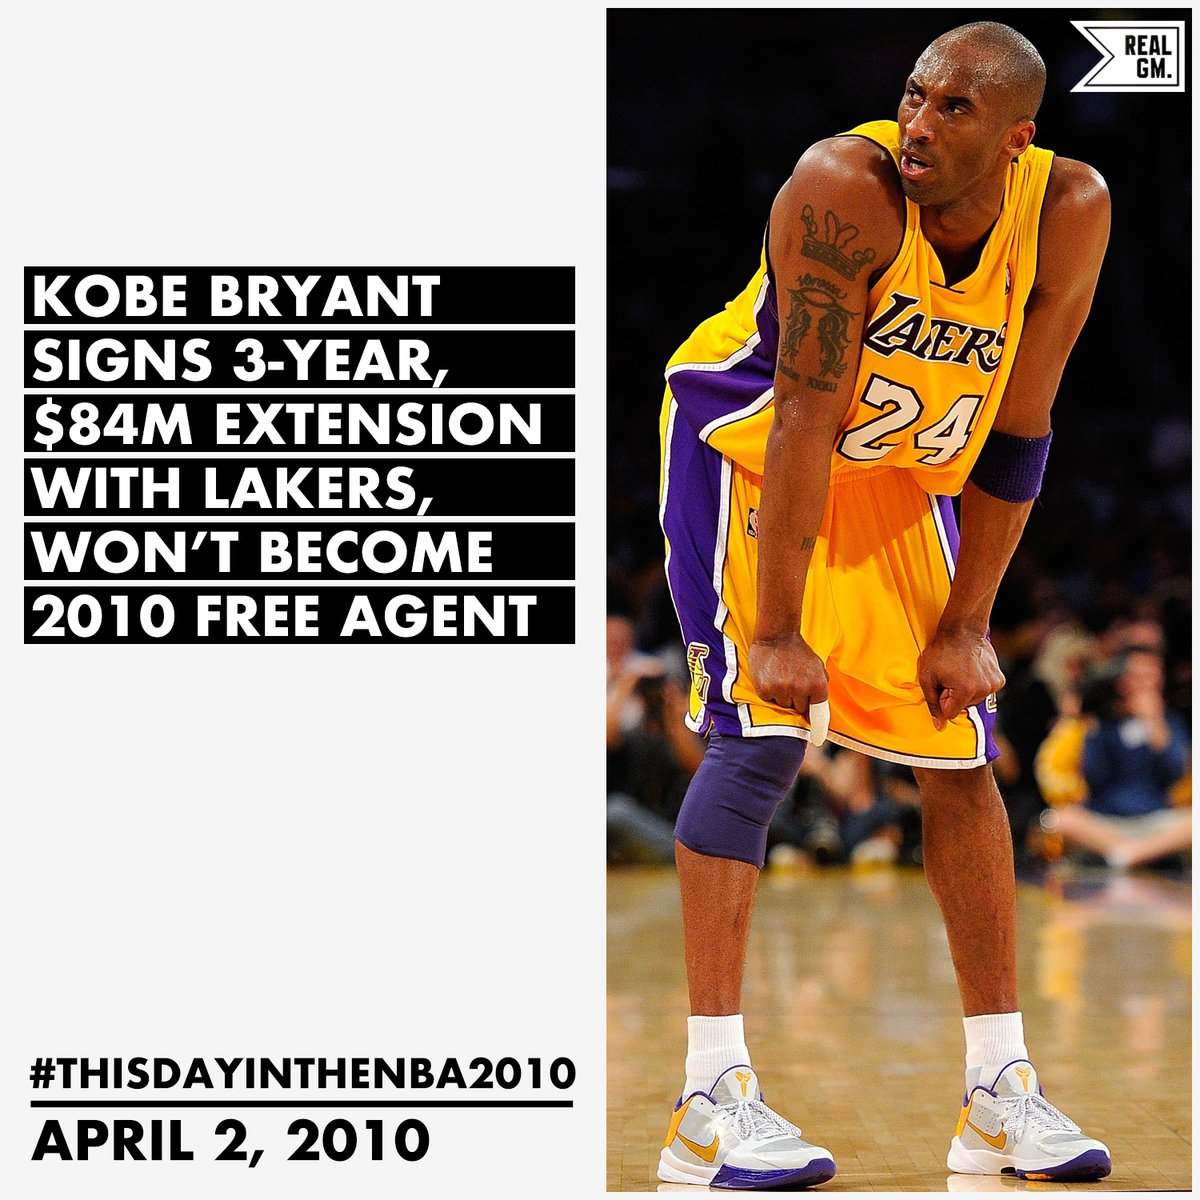  #ThisDayInTheNBA2010April 2, 2010Kobe Bryant Signs Three-Year, $84M Extension With Lakers, Won't Become 2010 Free Agent https://basketball.realgm.com/wiretap/203045/Kobe-Bryant-Signs-Three-Year-$84M-Extension-With-Lakers-Wont-Become-2010-Free-Agent